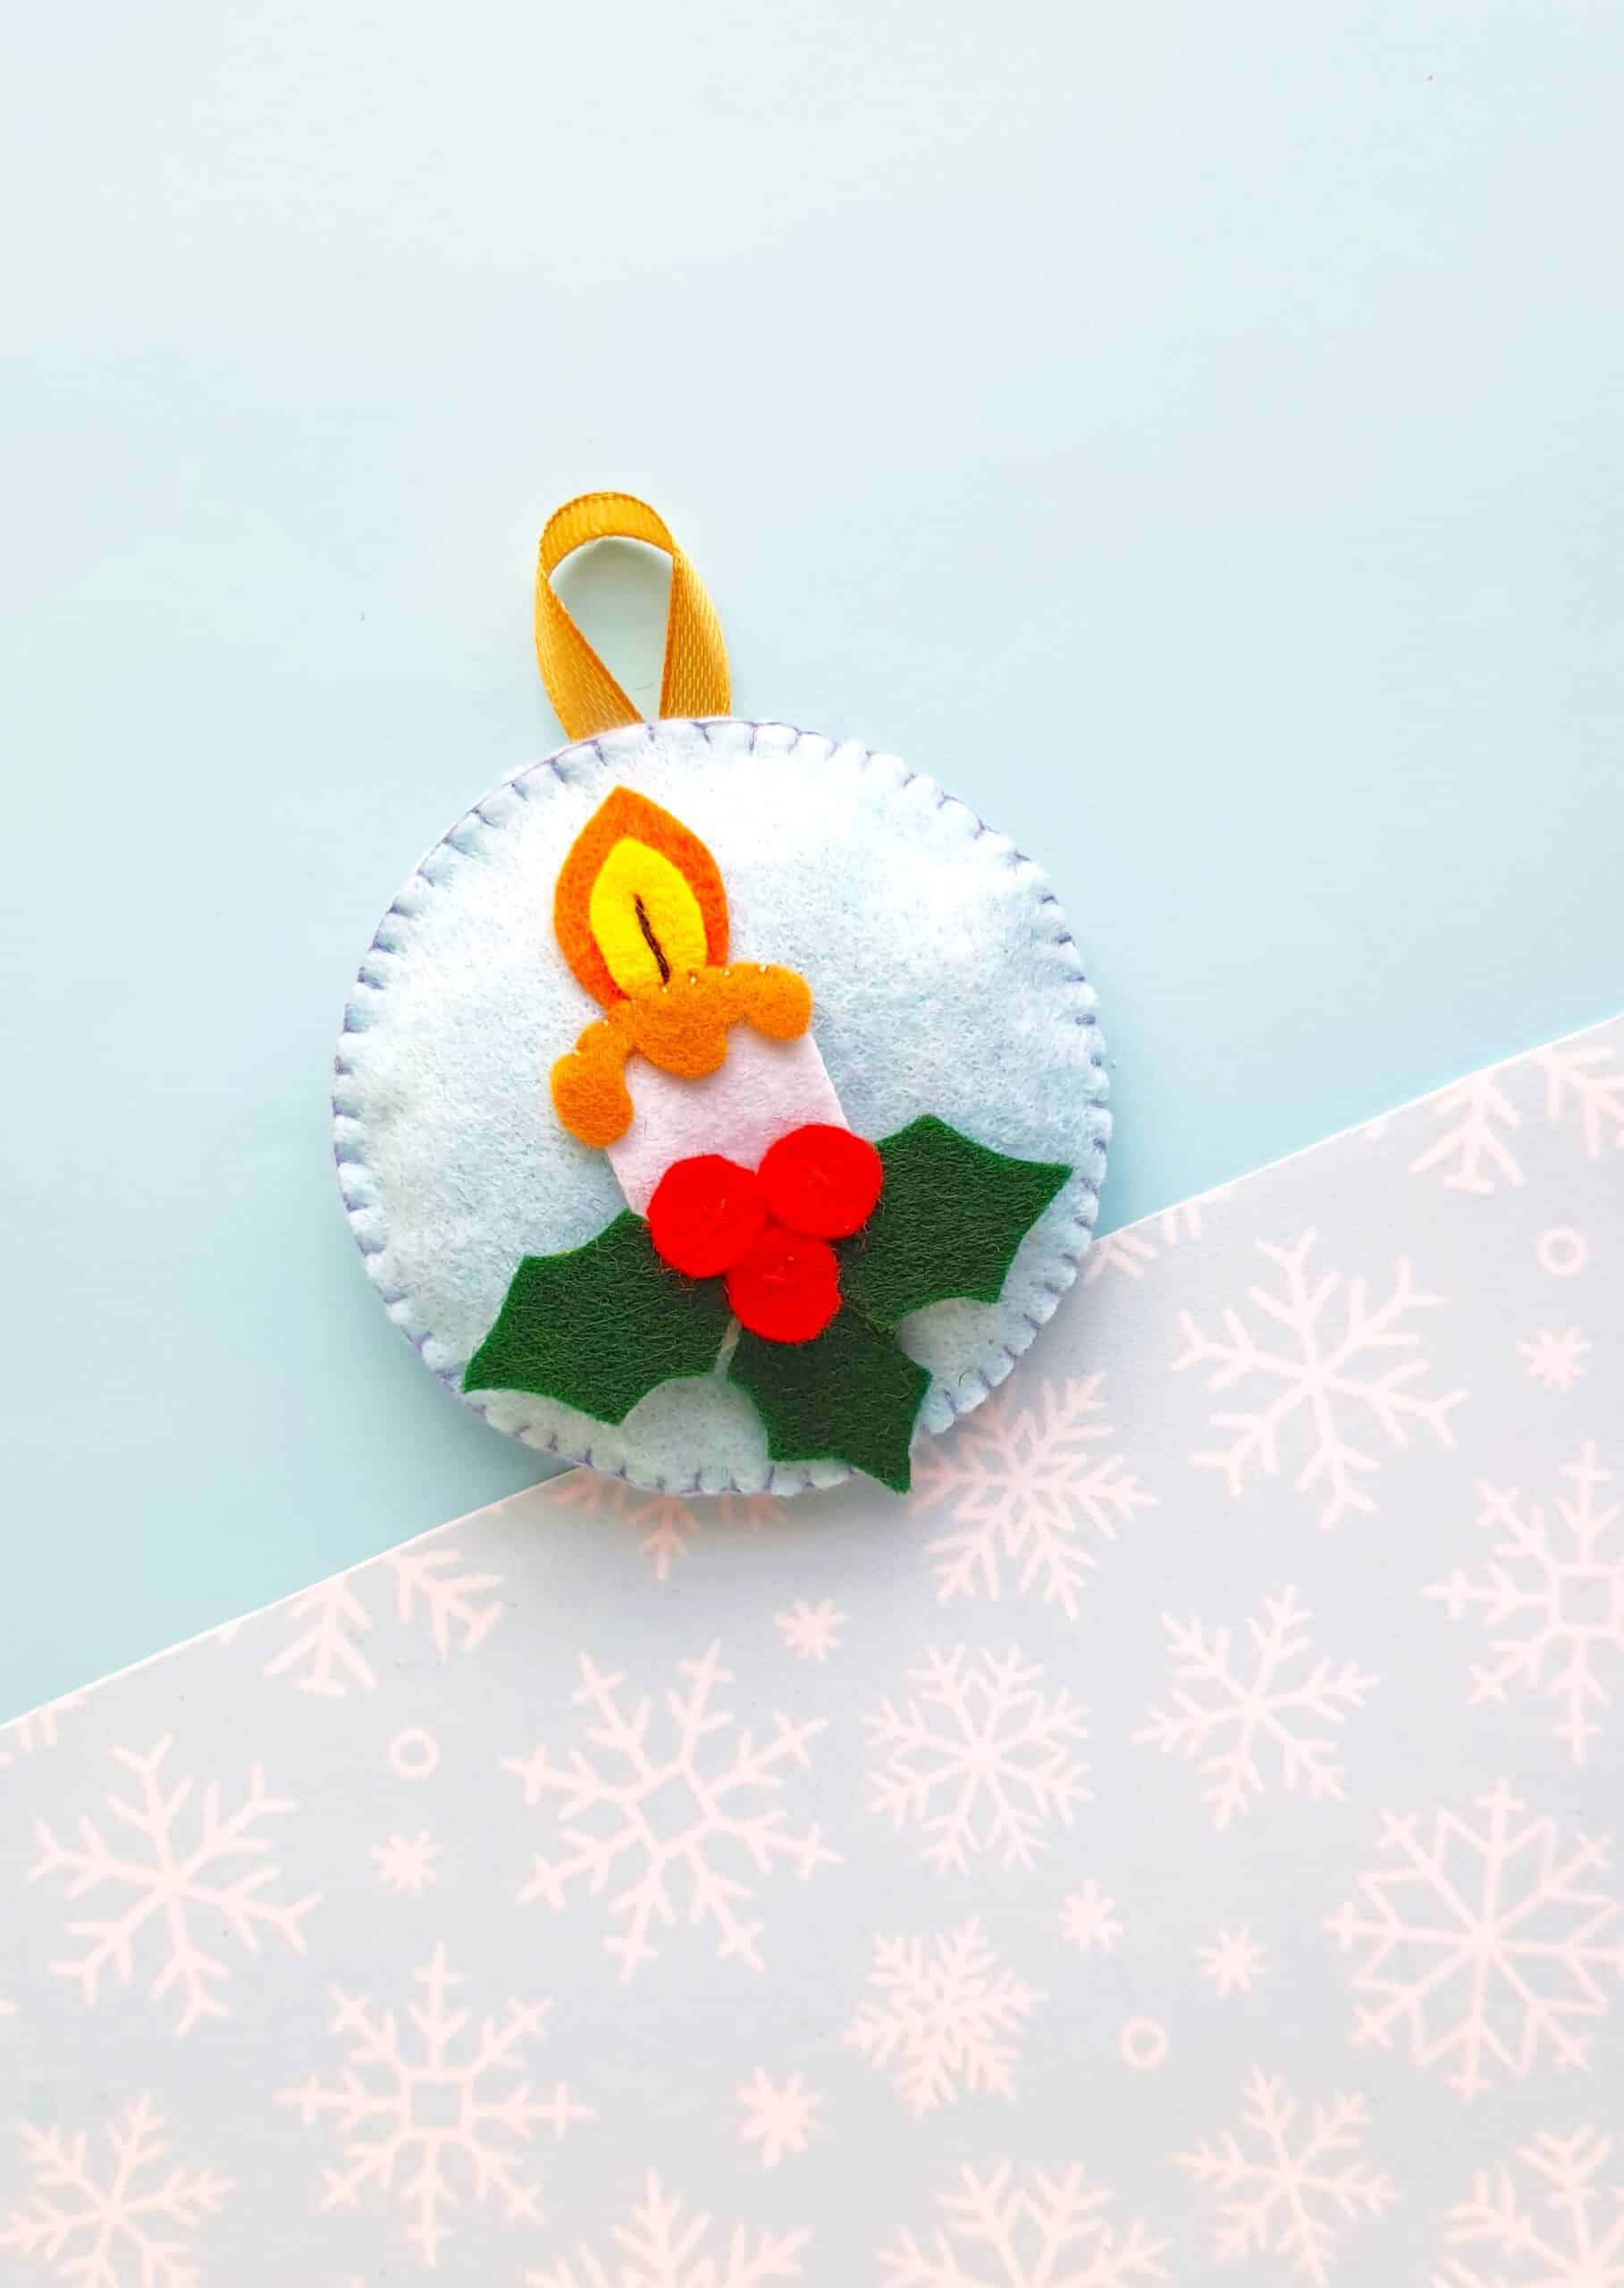 handmade felt candle ornament on a blue and snowflake background